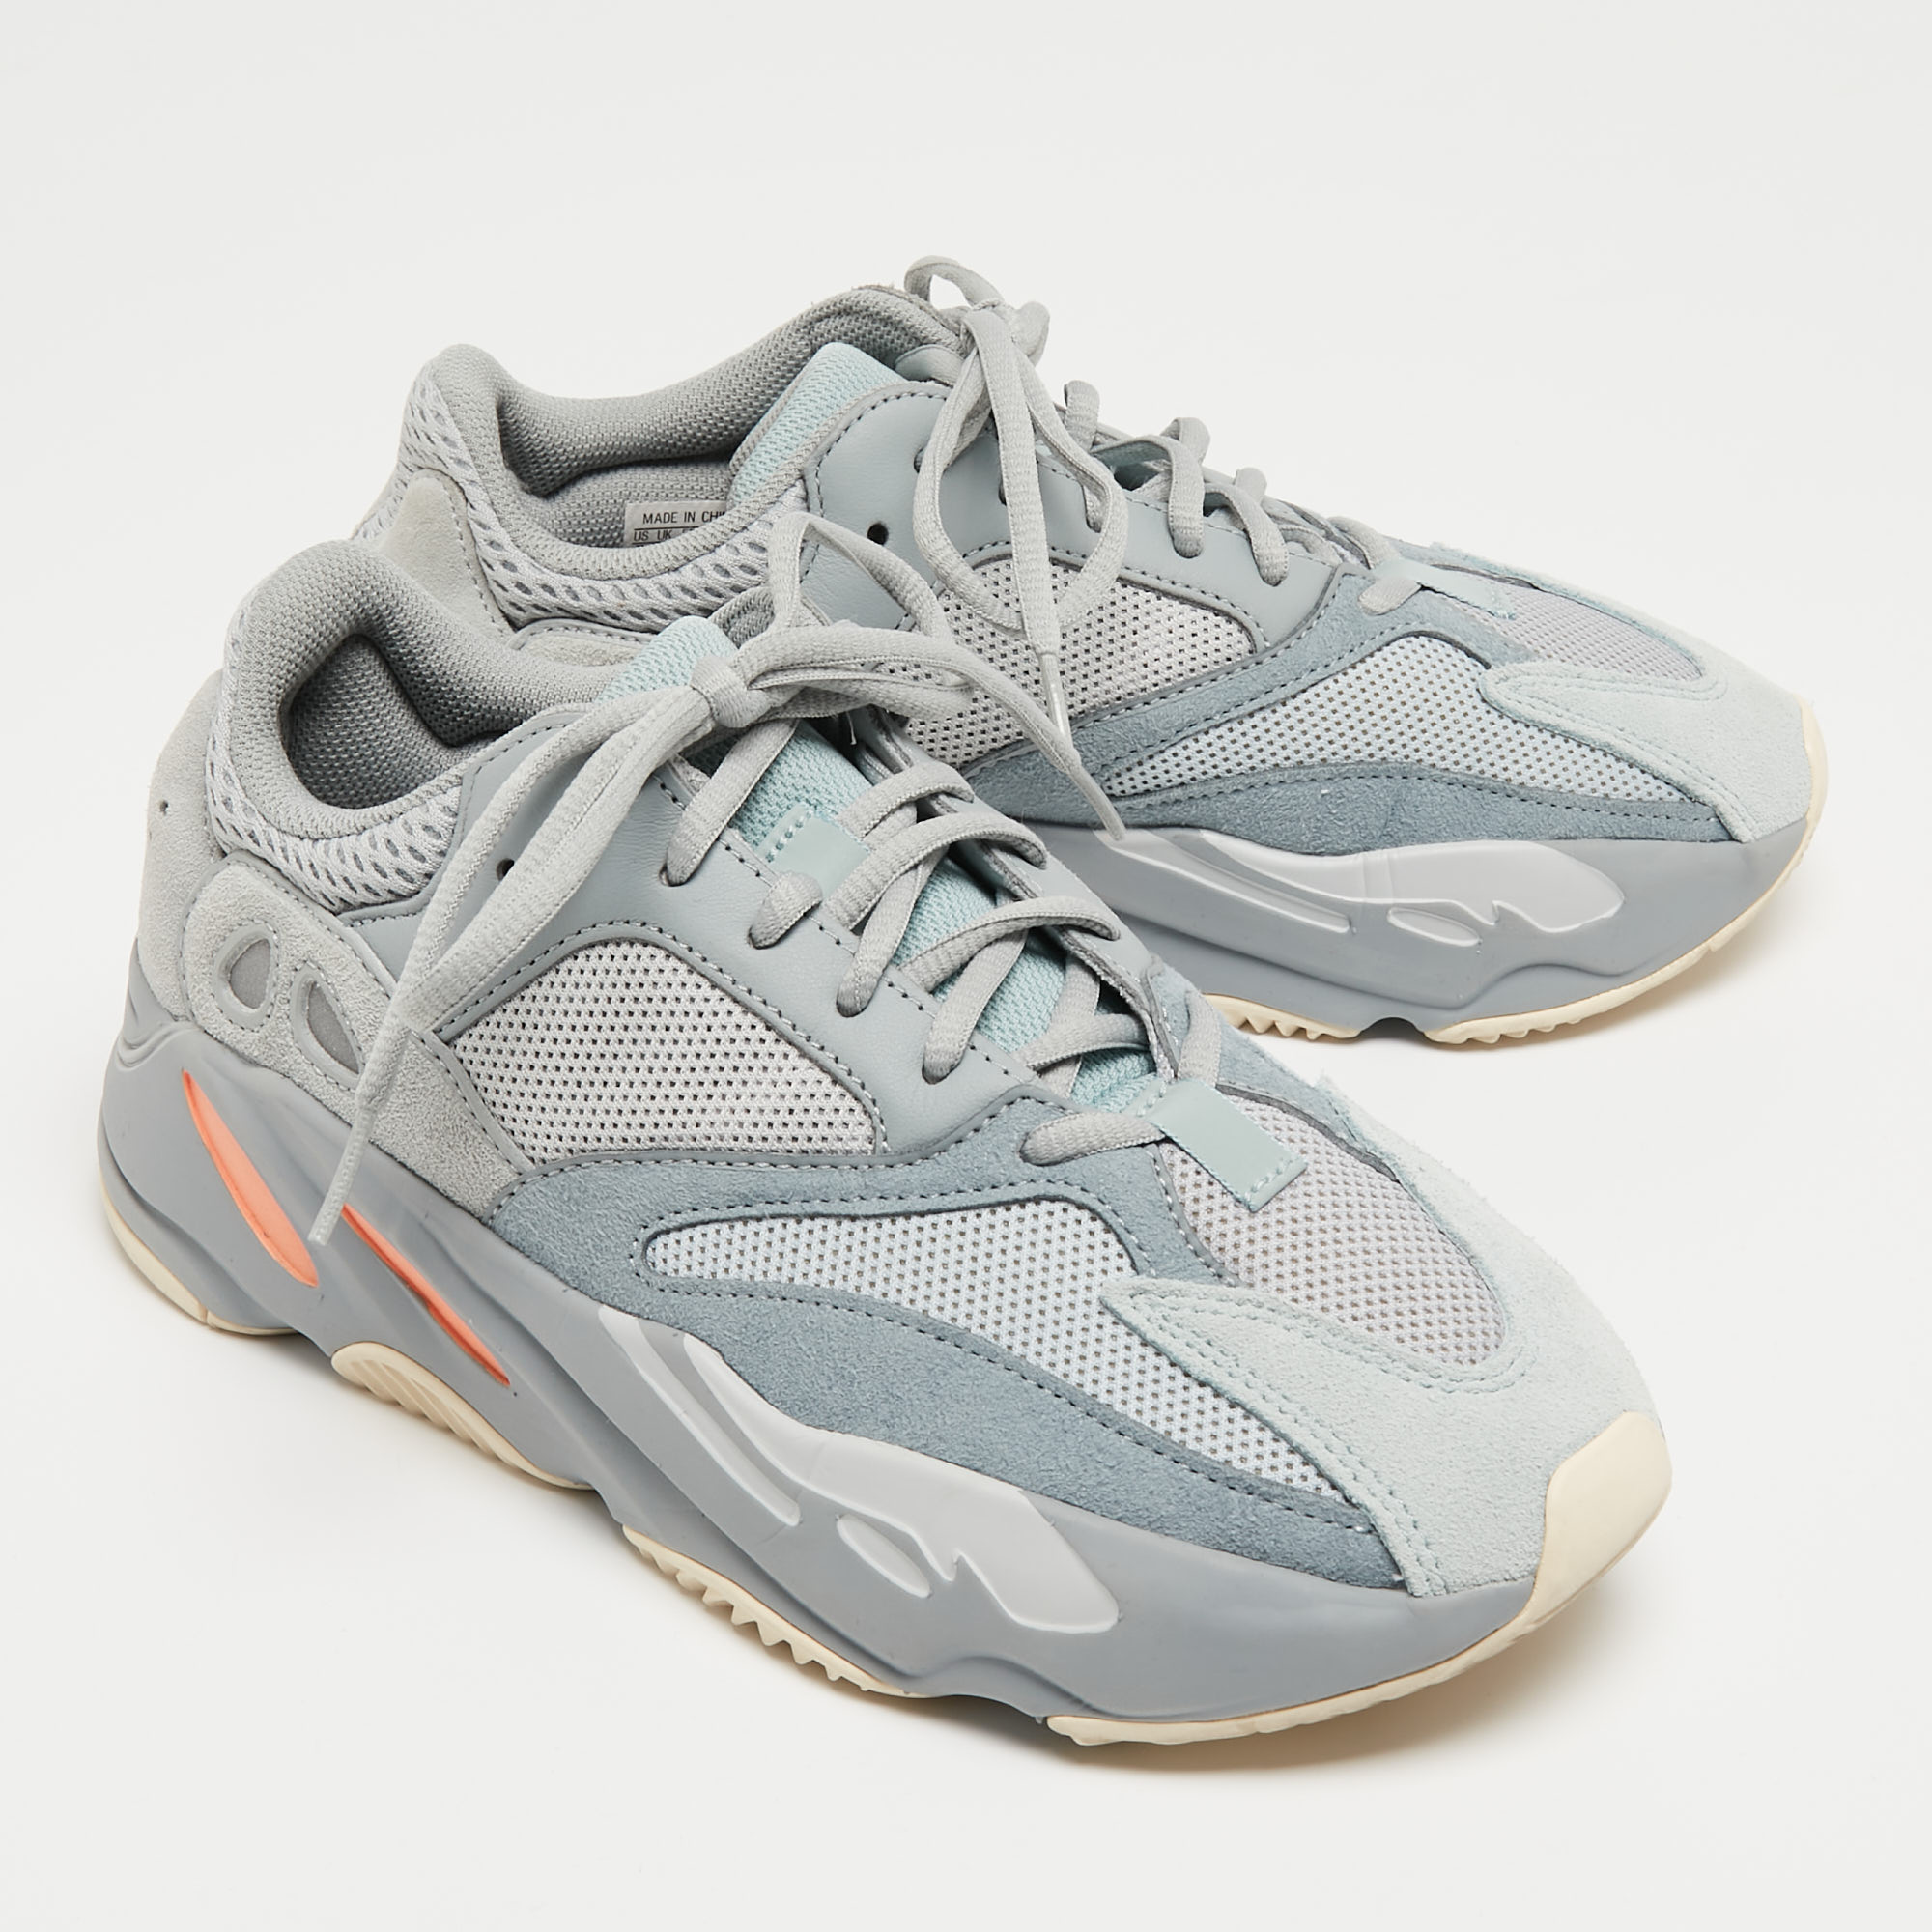 Adidas X Yeezy Blue Mesh And Leather Boost 700 Inertia Sneakers Size 40